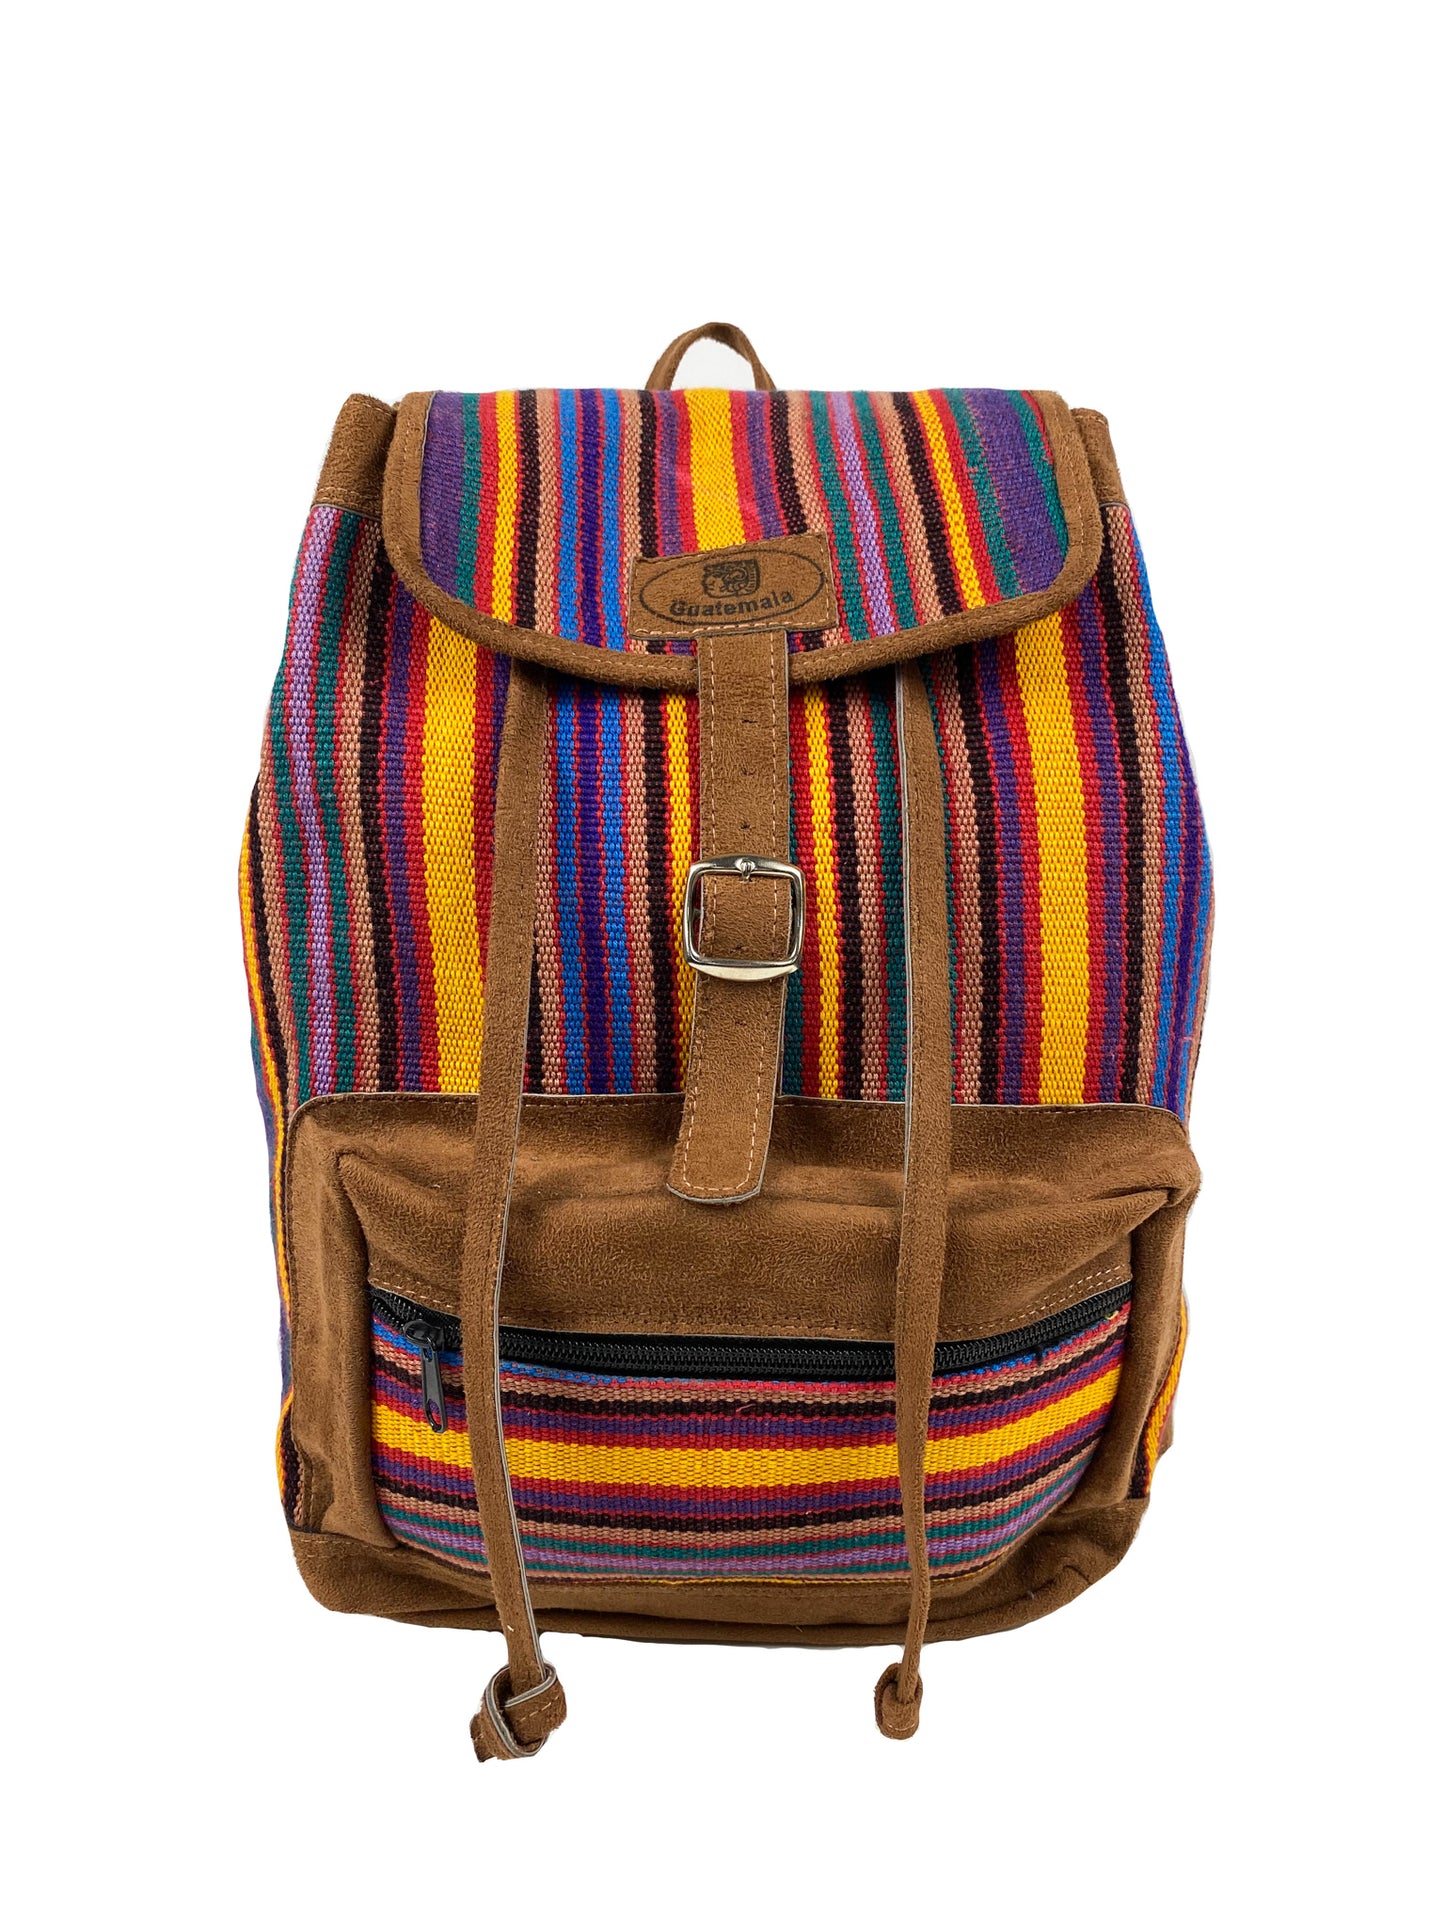 Colorful stripped handwoven fabric Handmade in Guatemala. Using intricate fabric. Front zipper pocket. Adjustable straps. Belt buckle closure. Available in 2 different styles. This one comes in bright purple. Perfect for school, shopping, and travel.